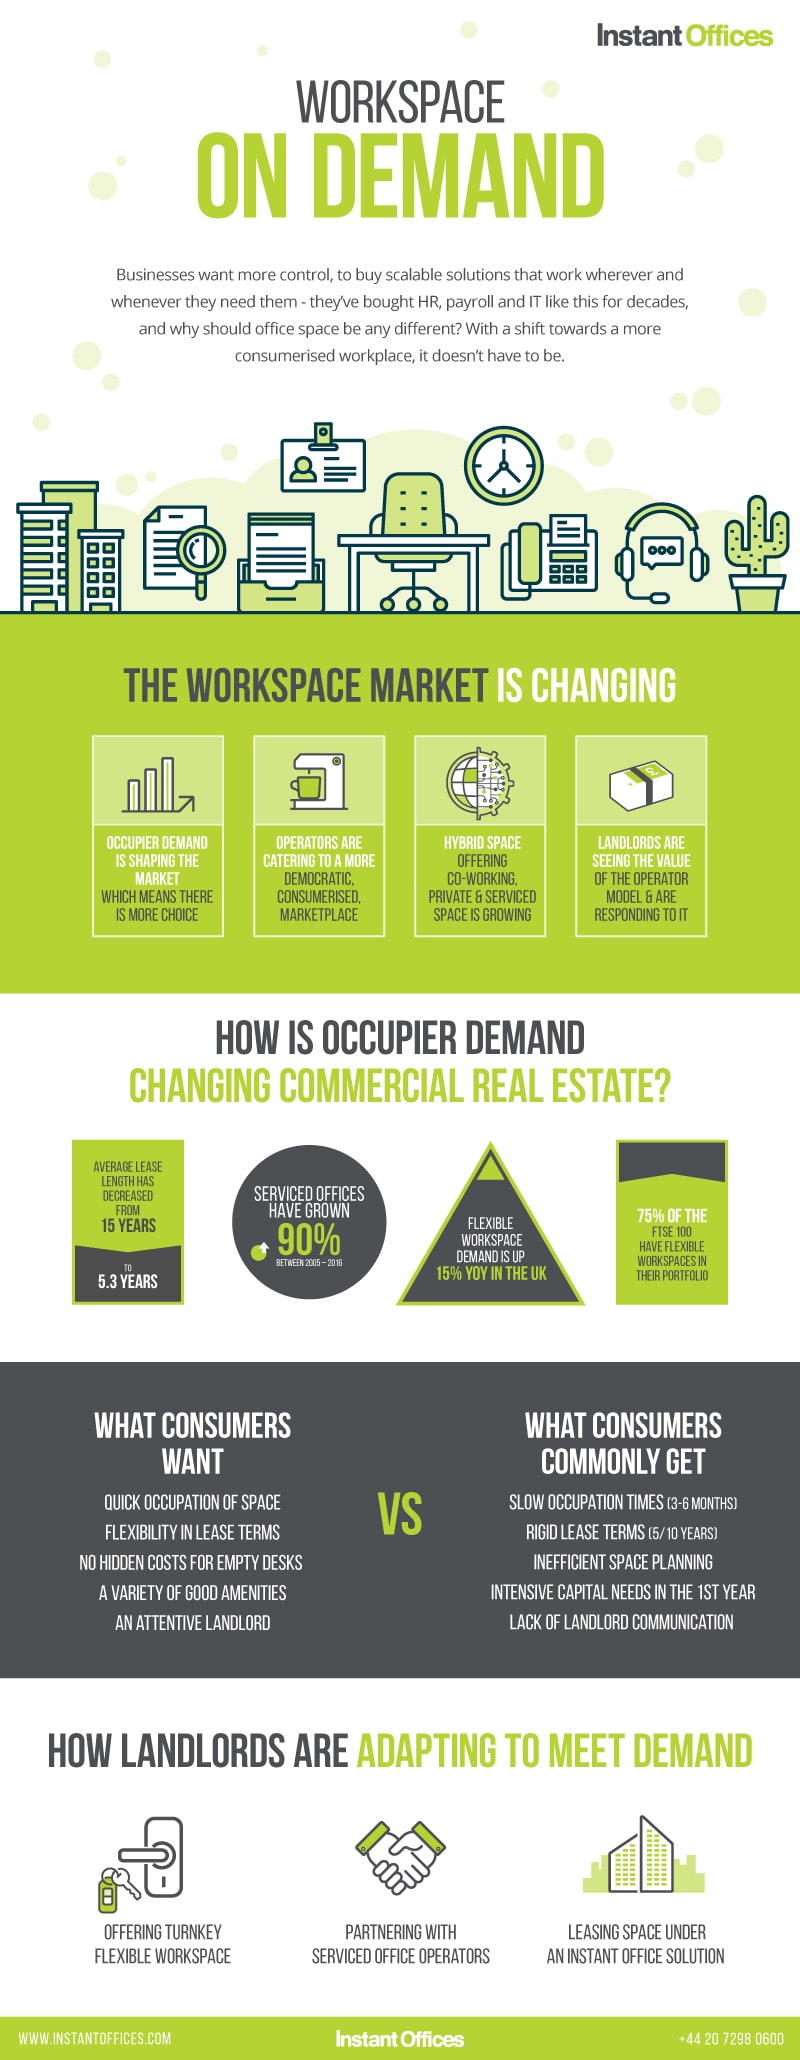 How are landlords responding to the new demands for workspace? Instant Offices Infographic